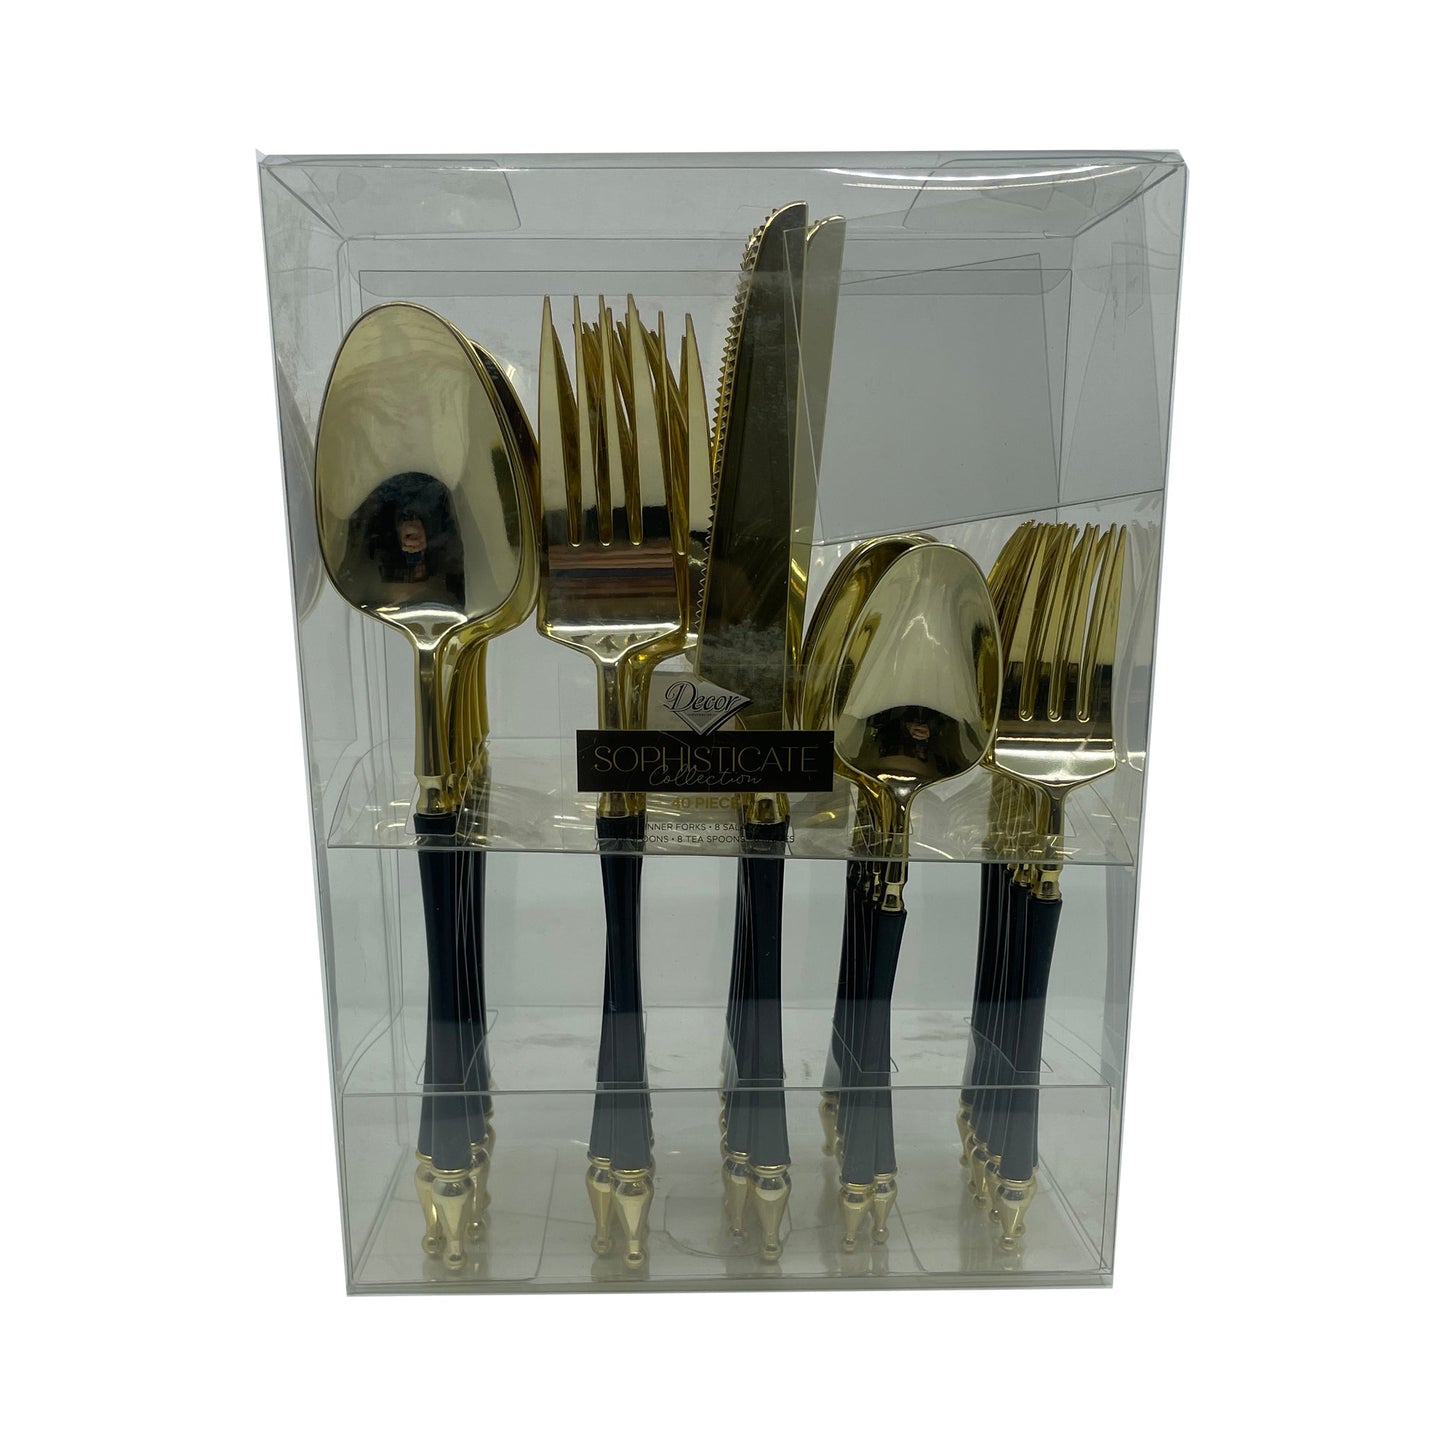 Sophisticated Cutlery 40 pcs Black / Gold Top Plastic Tableware  Sophisticate   